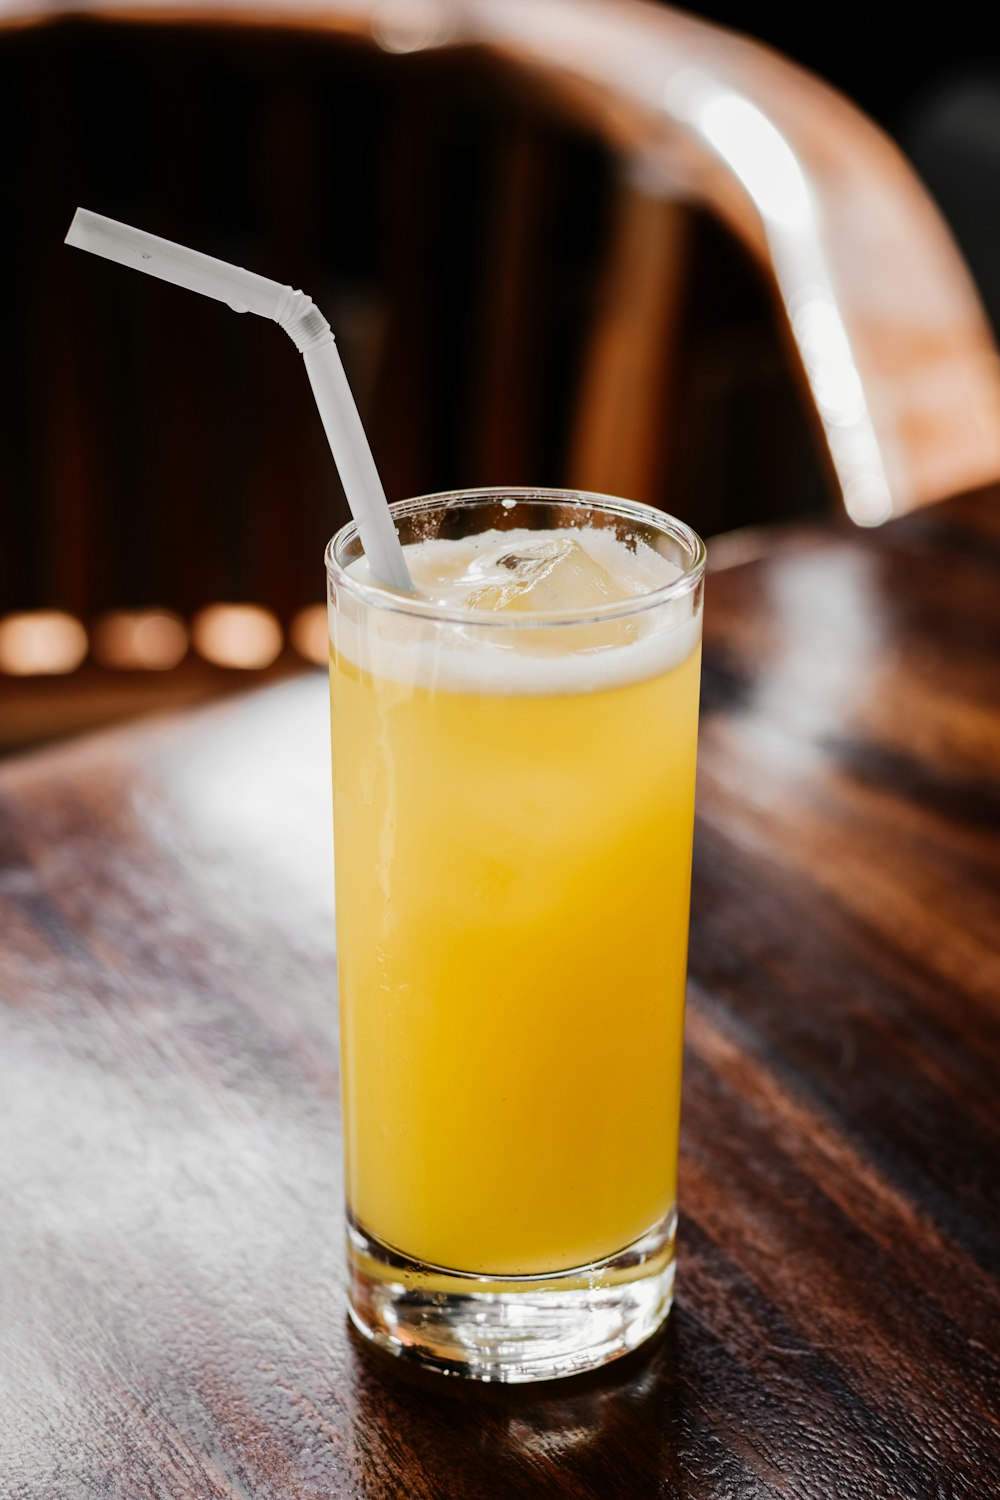 a glass of orange juice on a wooden table